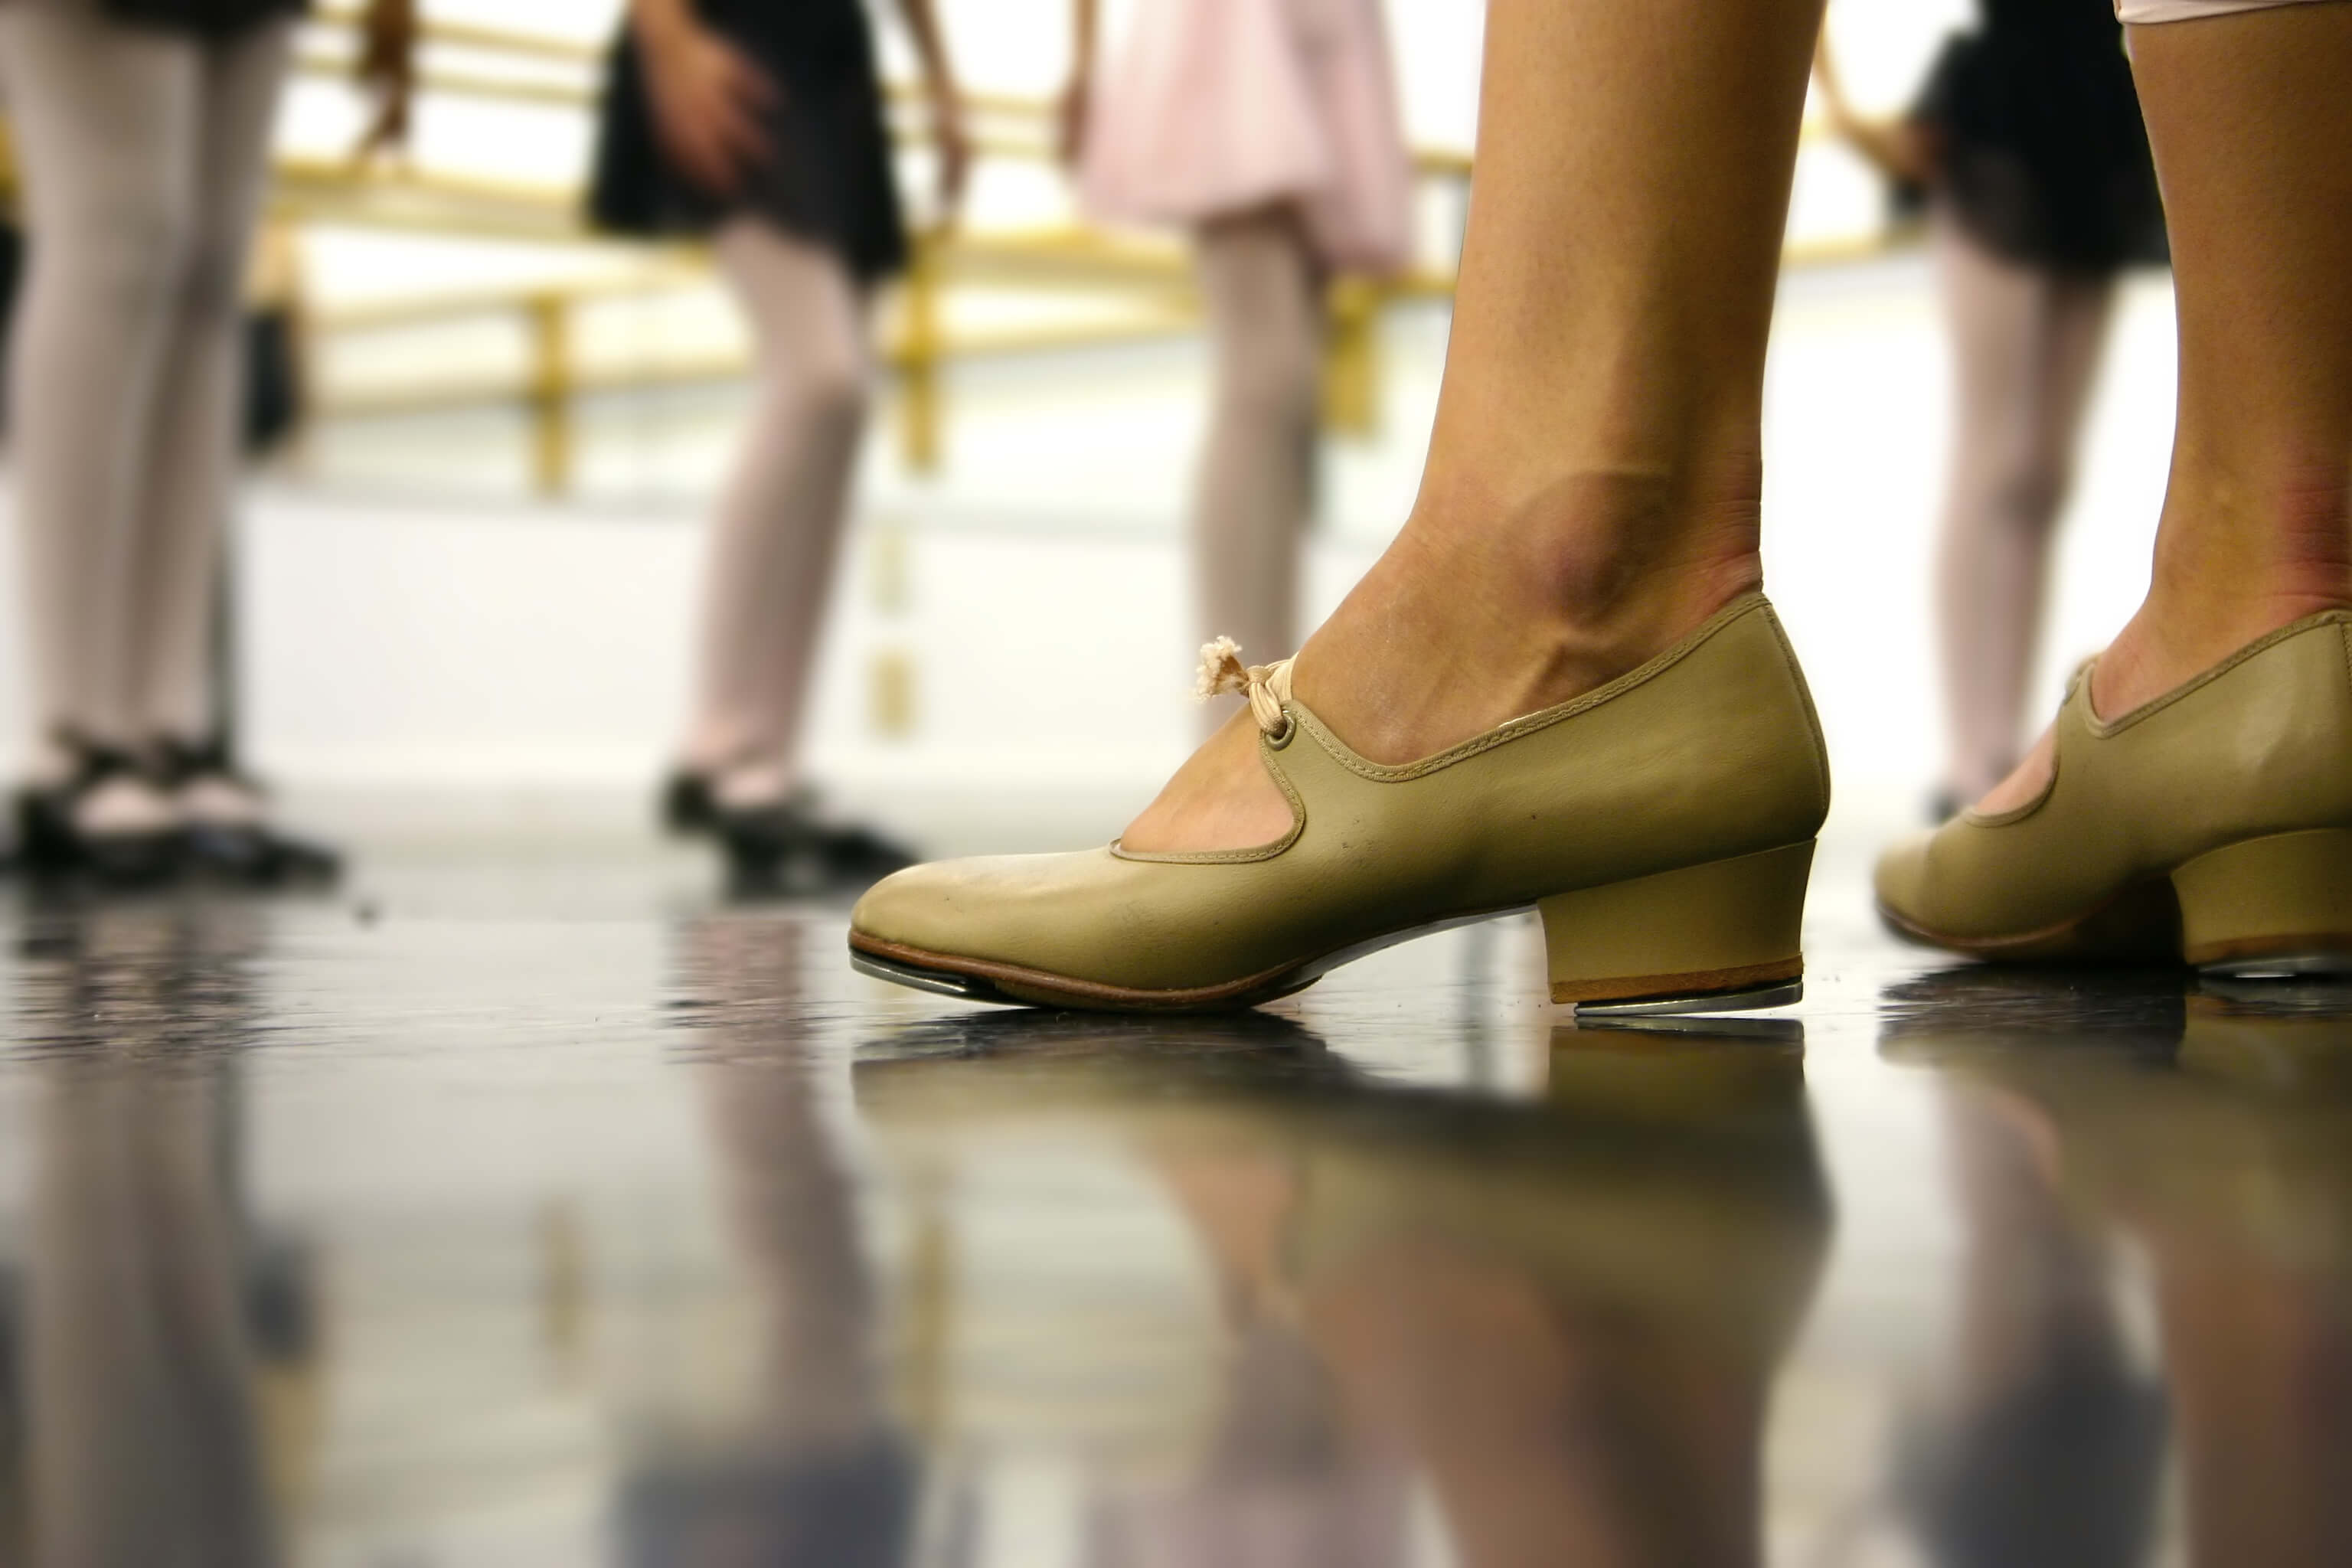 Lady teaching class in her dance shoes